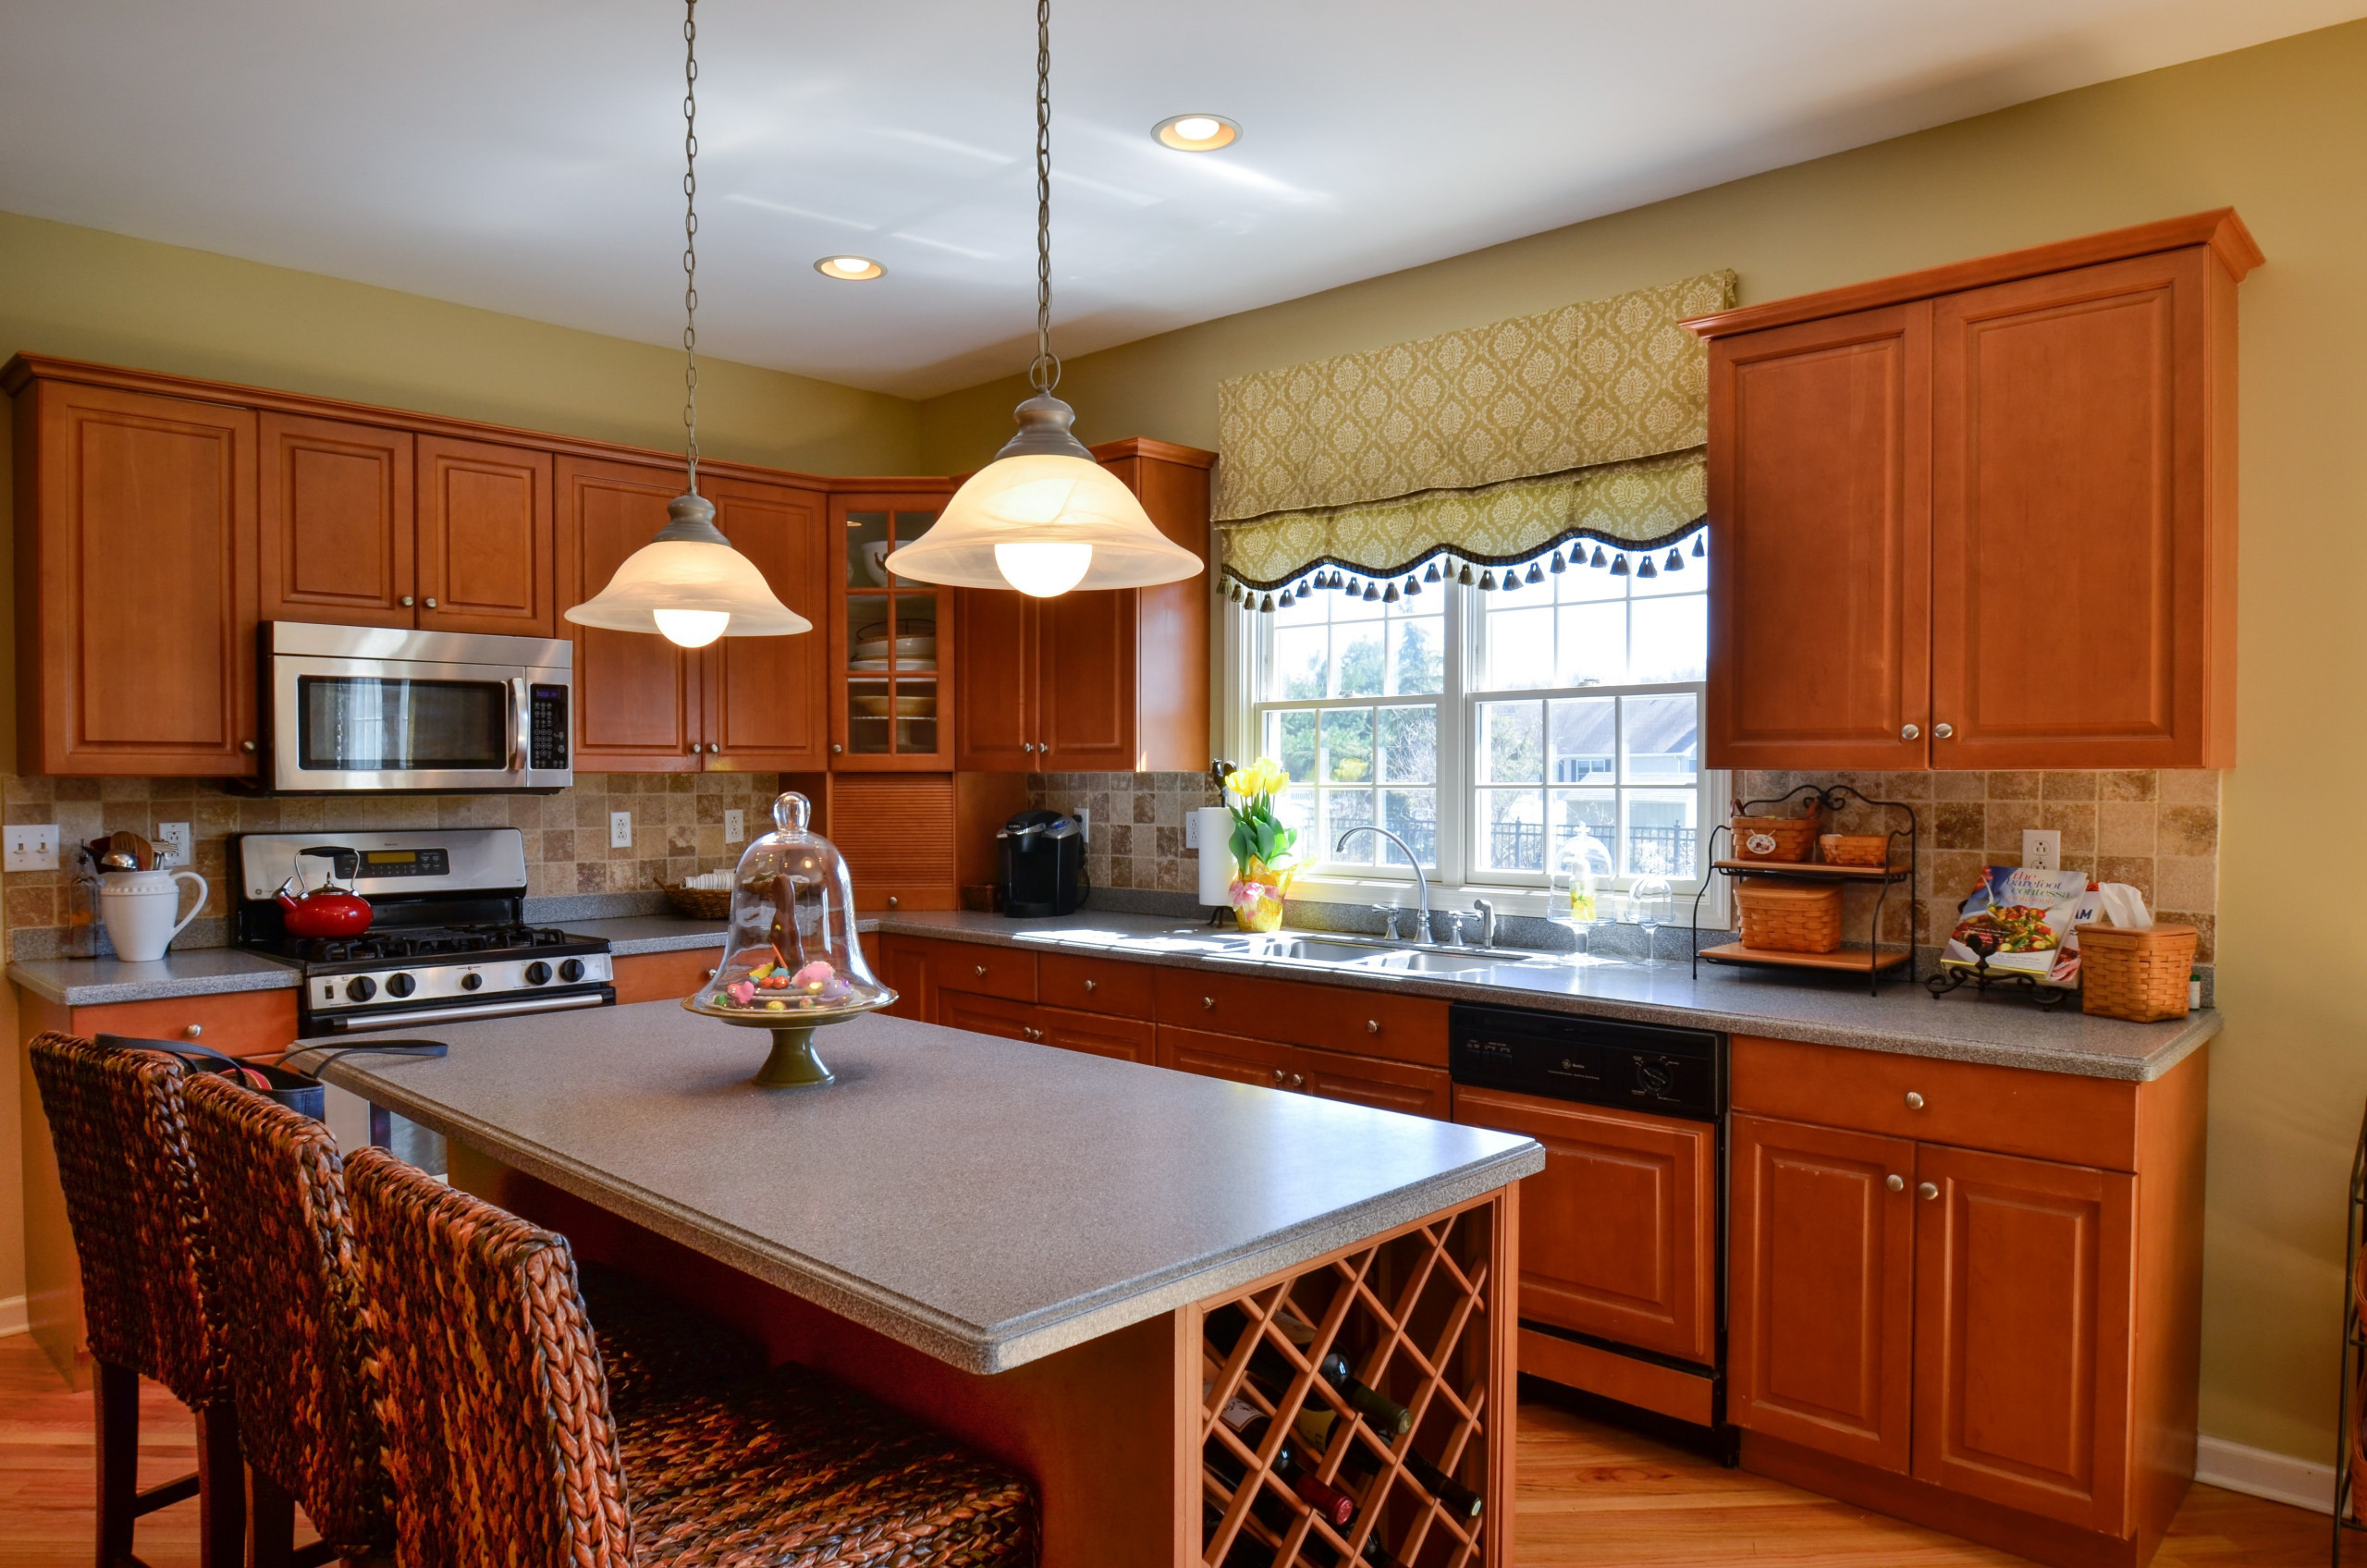 Kitchen with panels and shade with fabric and matching tassel trim.